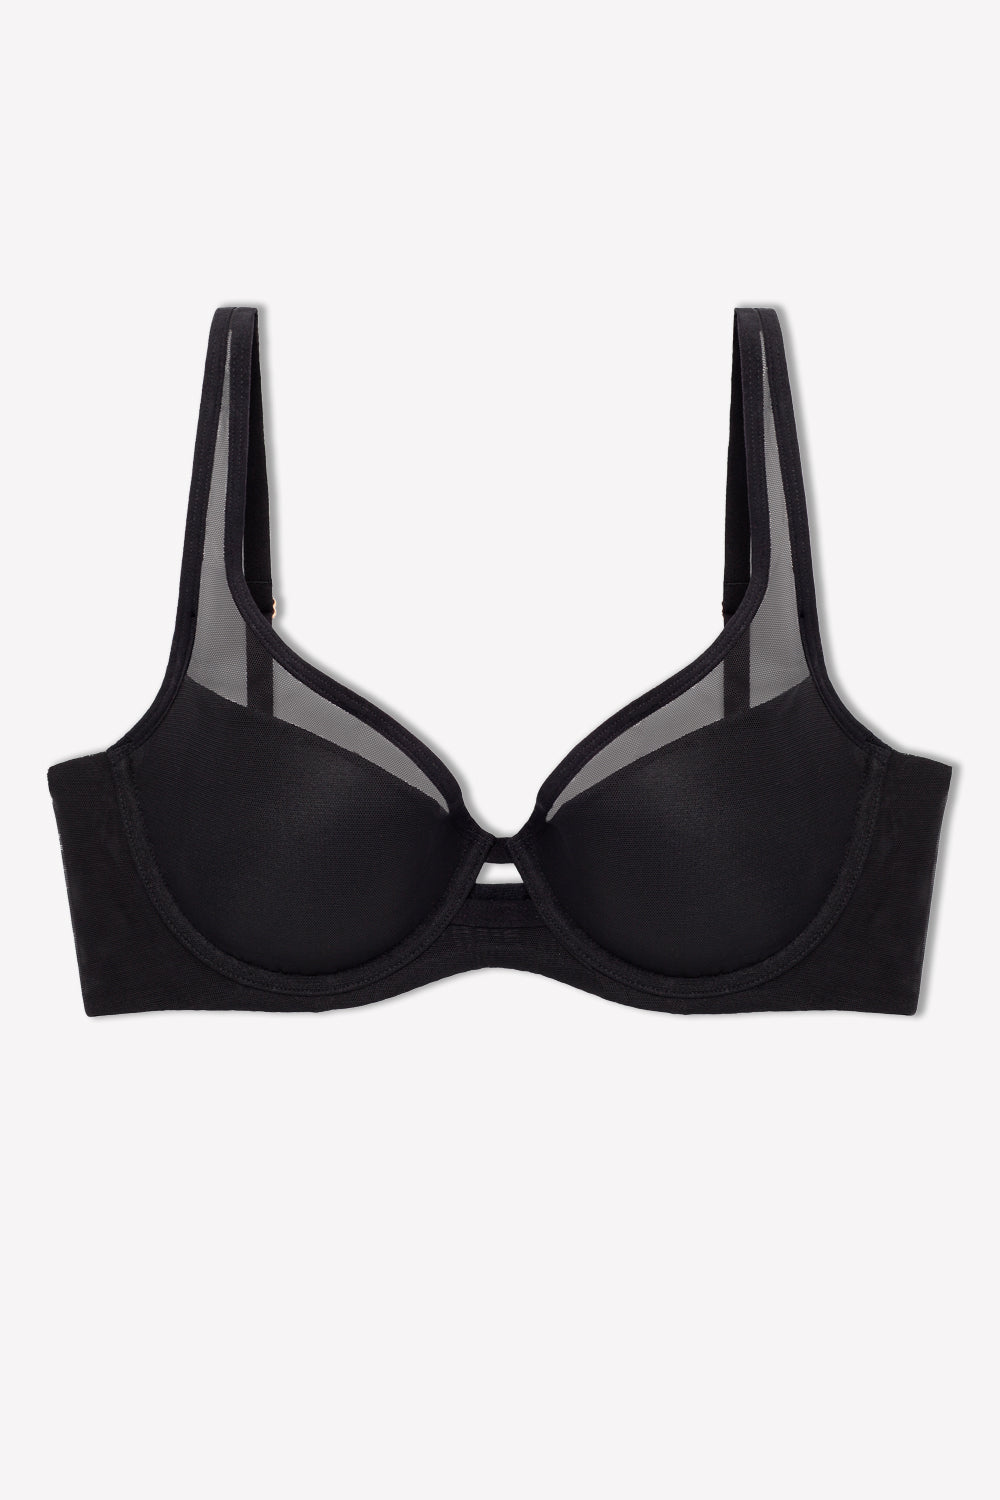 The Natural Women's Sexy Plunge Bra, Black, X-Small 